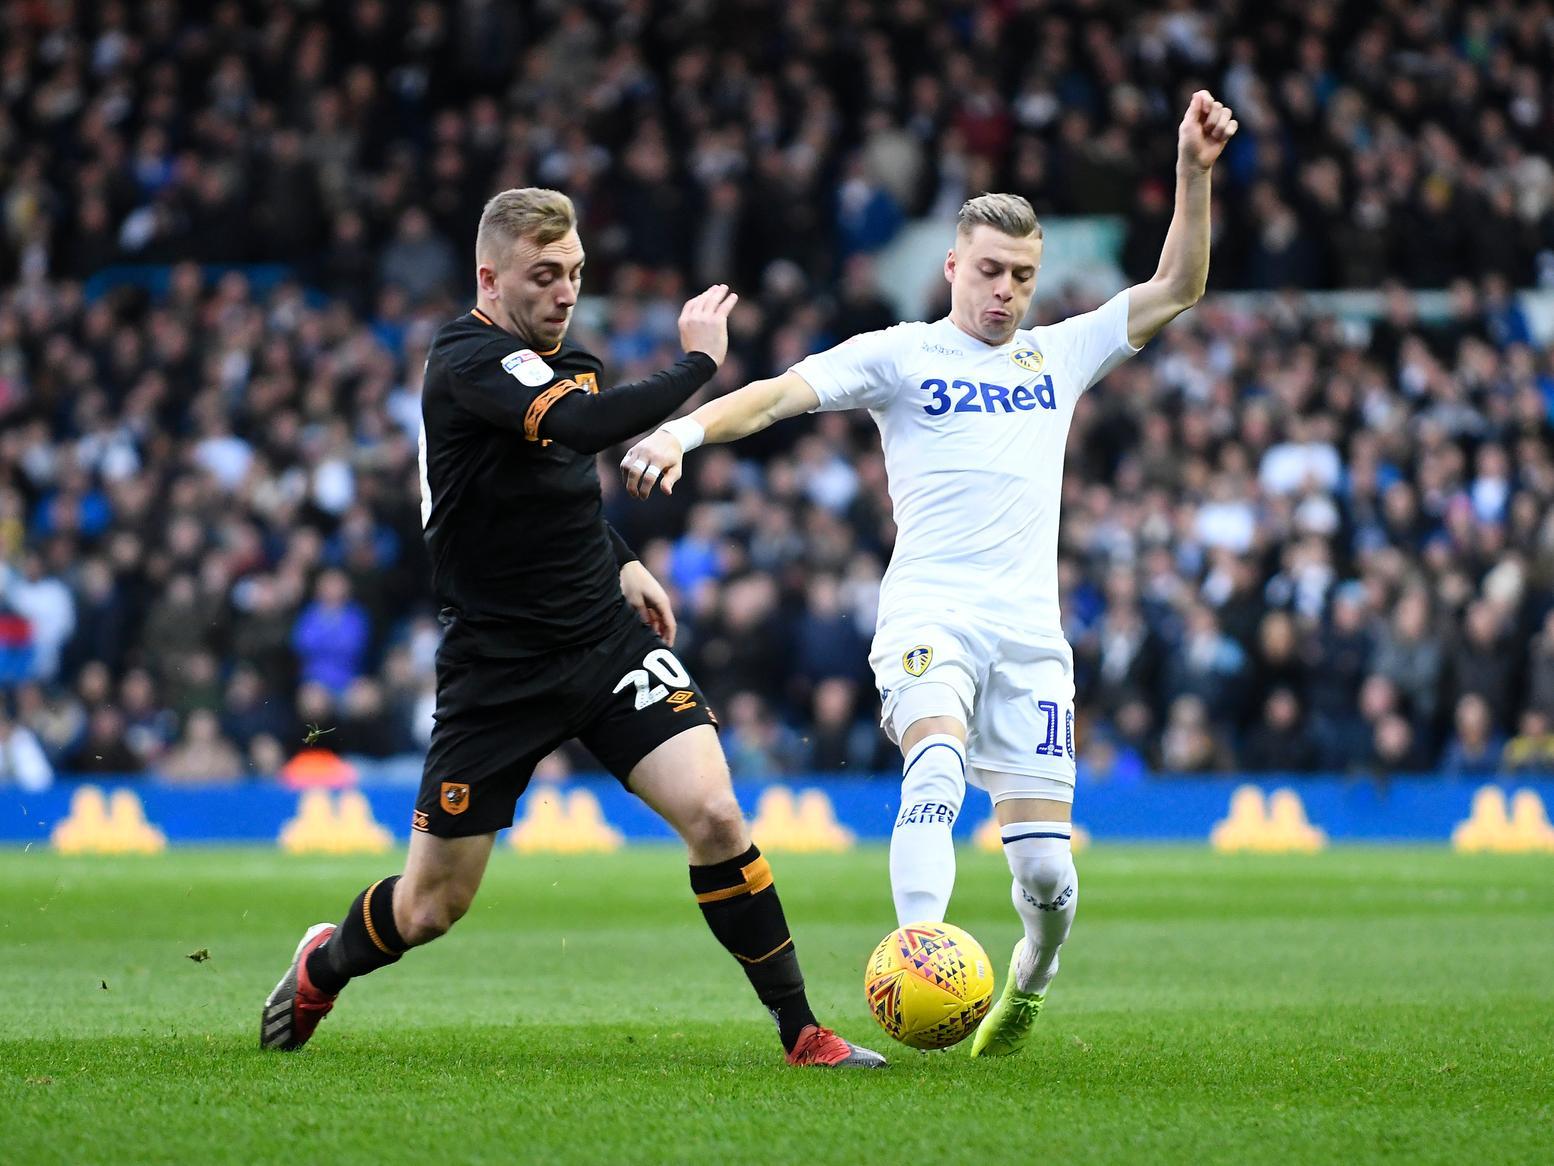 Leeds fans know all about Bowen after he put in a sterling performance at Elland Road last December. The Hull star has been in fine form since, leading Kevin Phillips